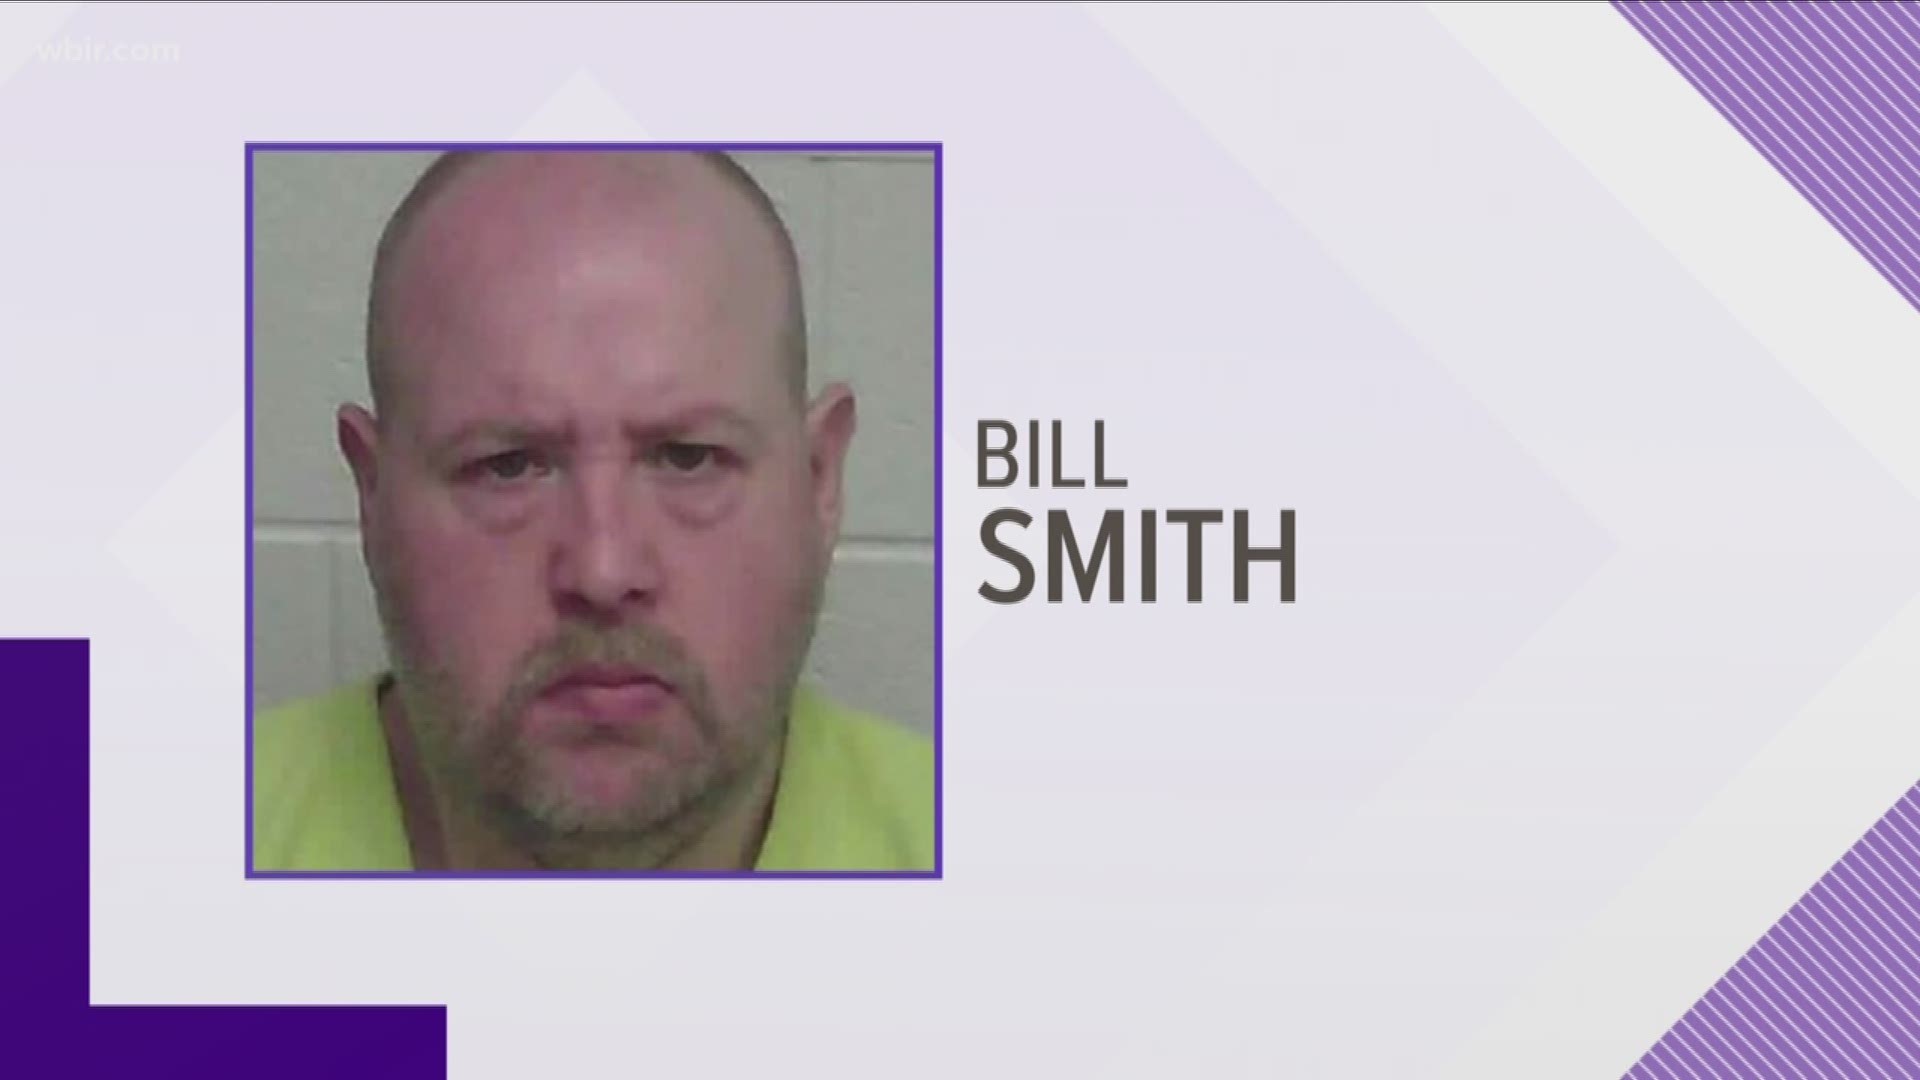 A man in Claiborne County is behind bars, accused of killing his wife.